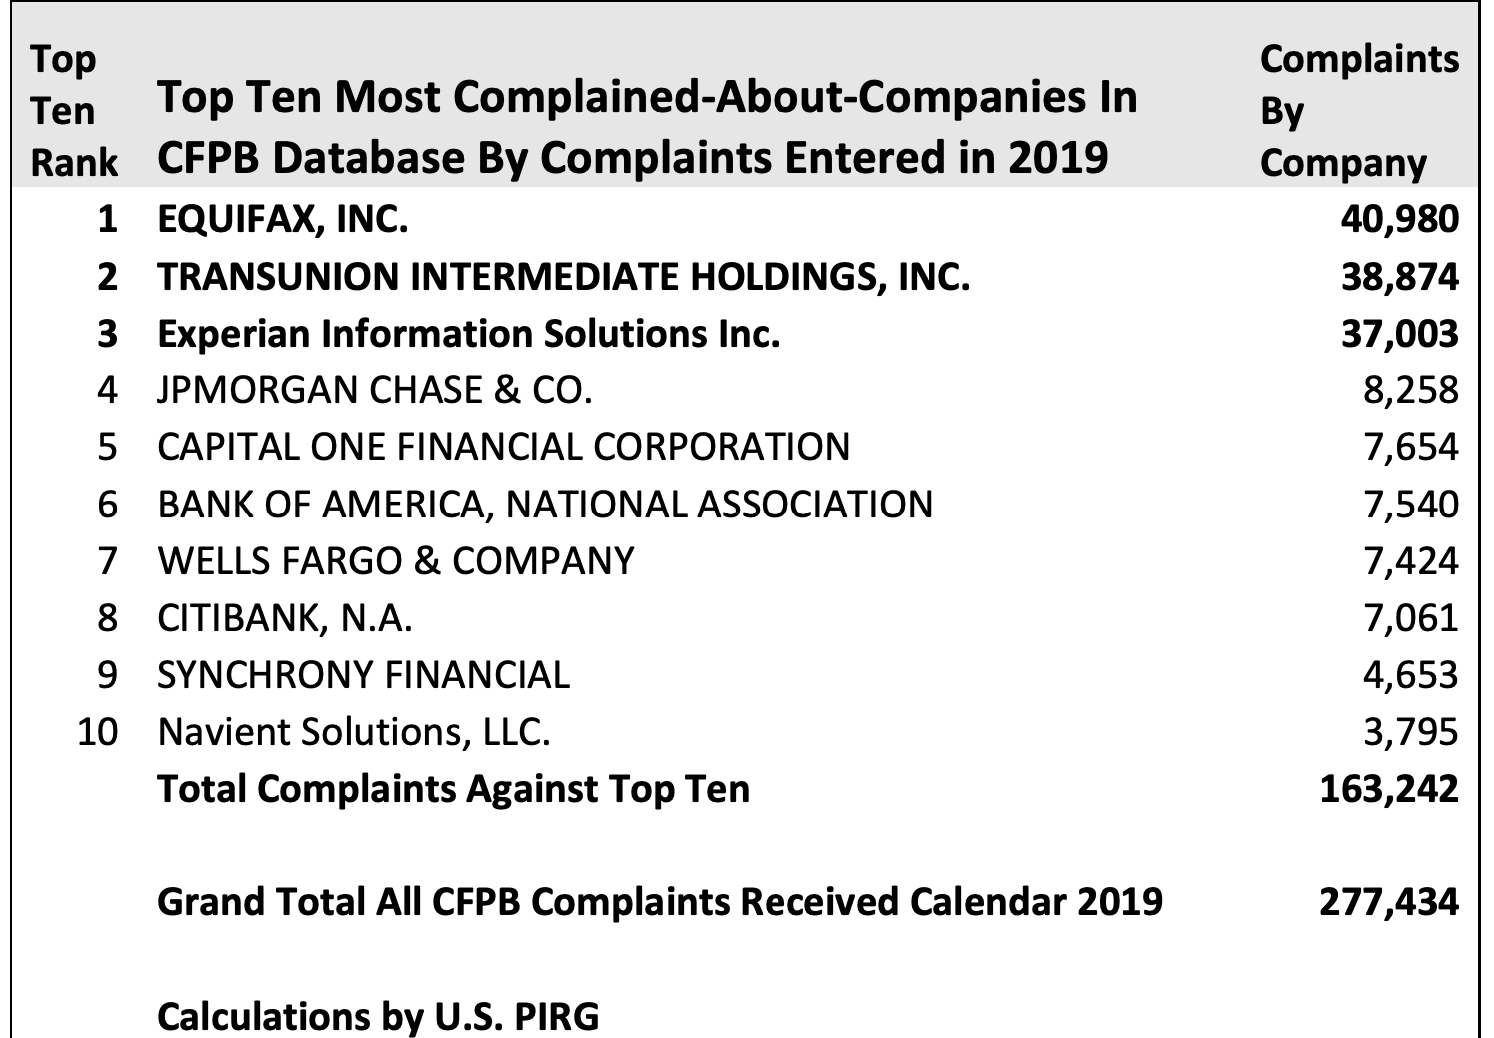 CFPB: Top Ten Complained About Companies In 2019